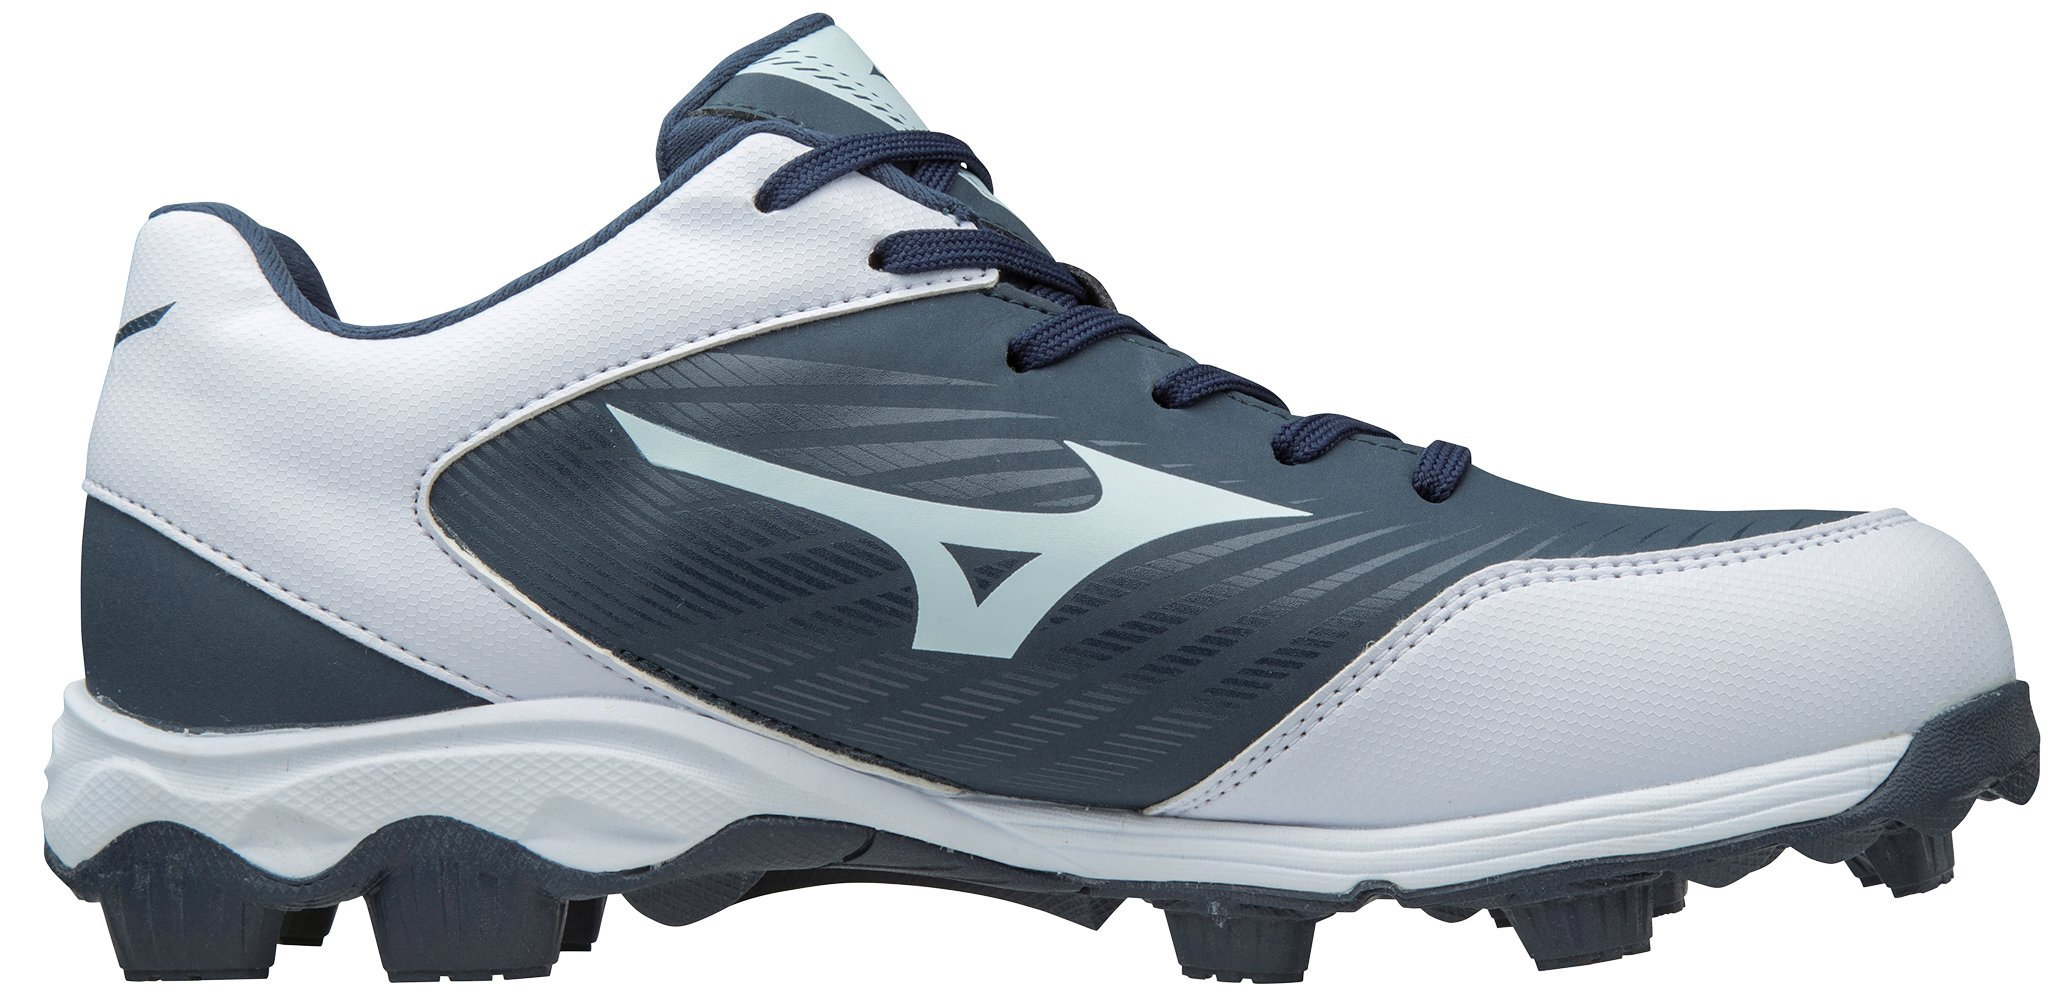 Mizuno 9-Spike Advanced Franchise 9 Low Baseball Cleats Size 11.5 Navy/White - image 4 of 6